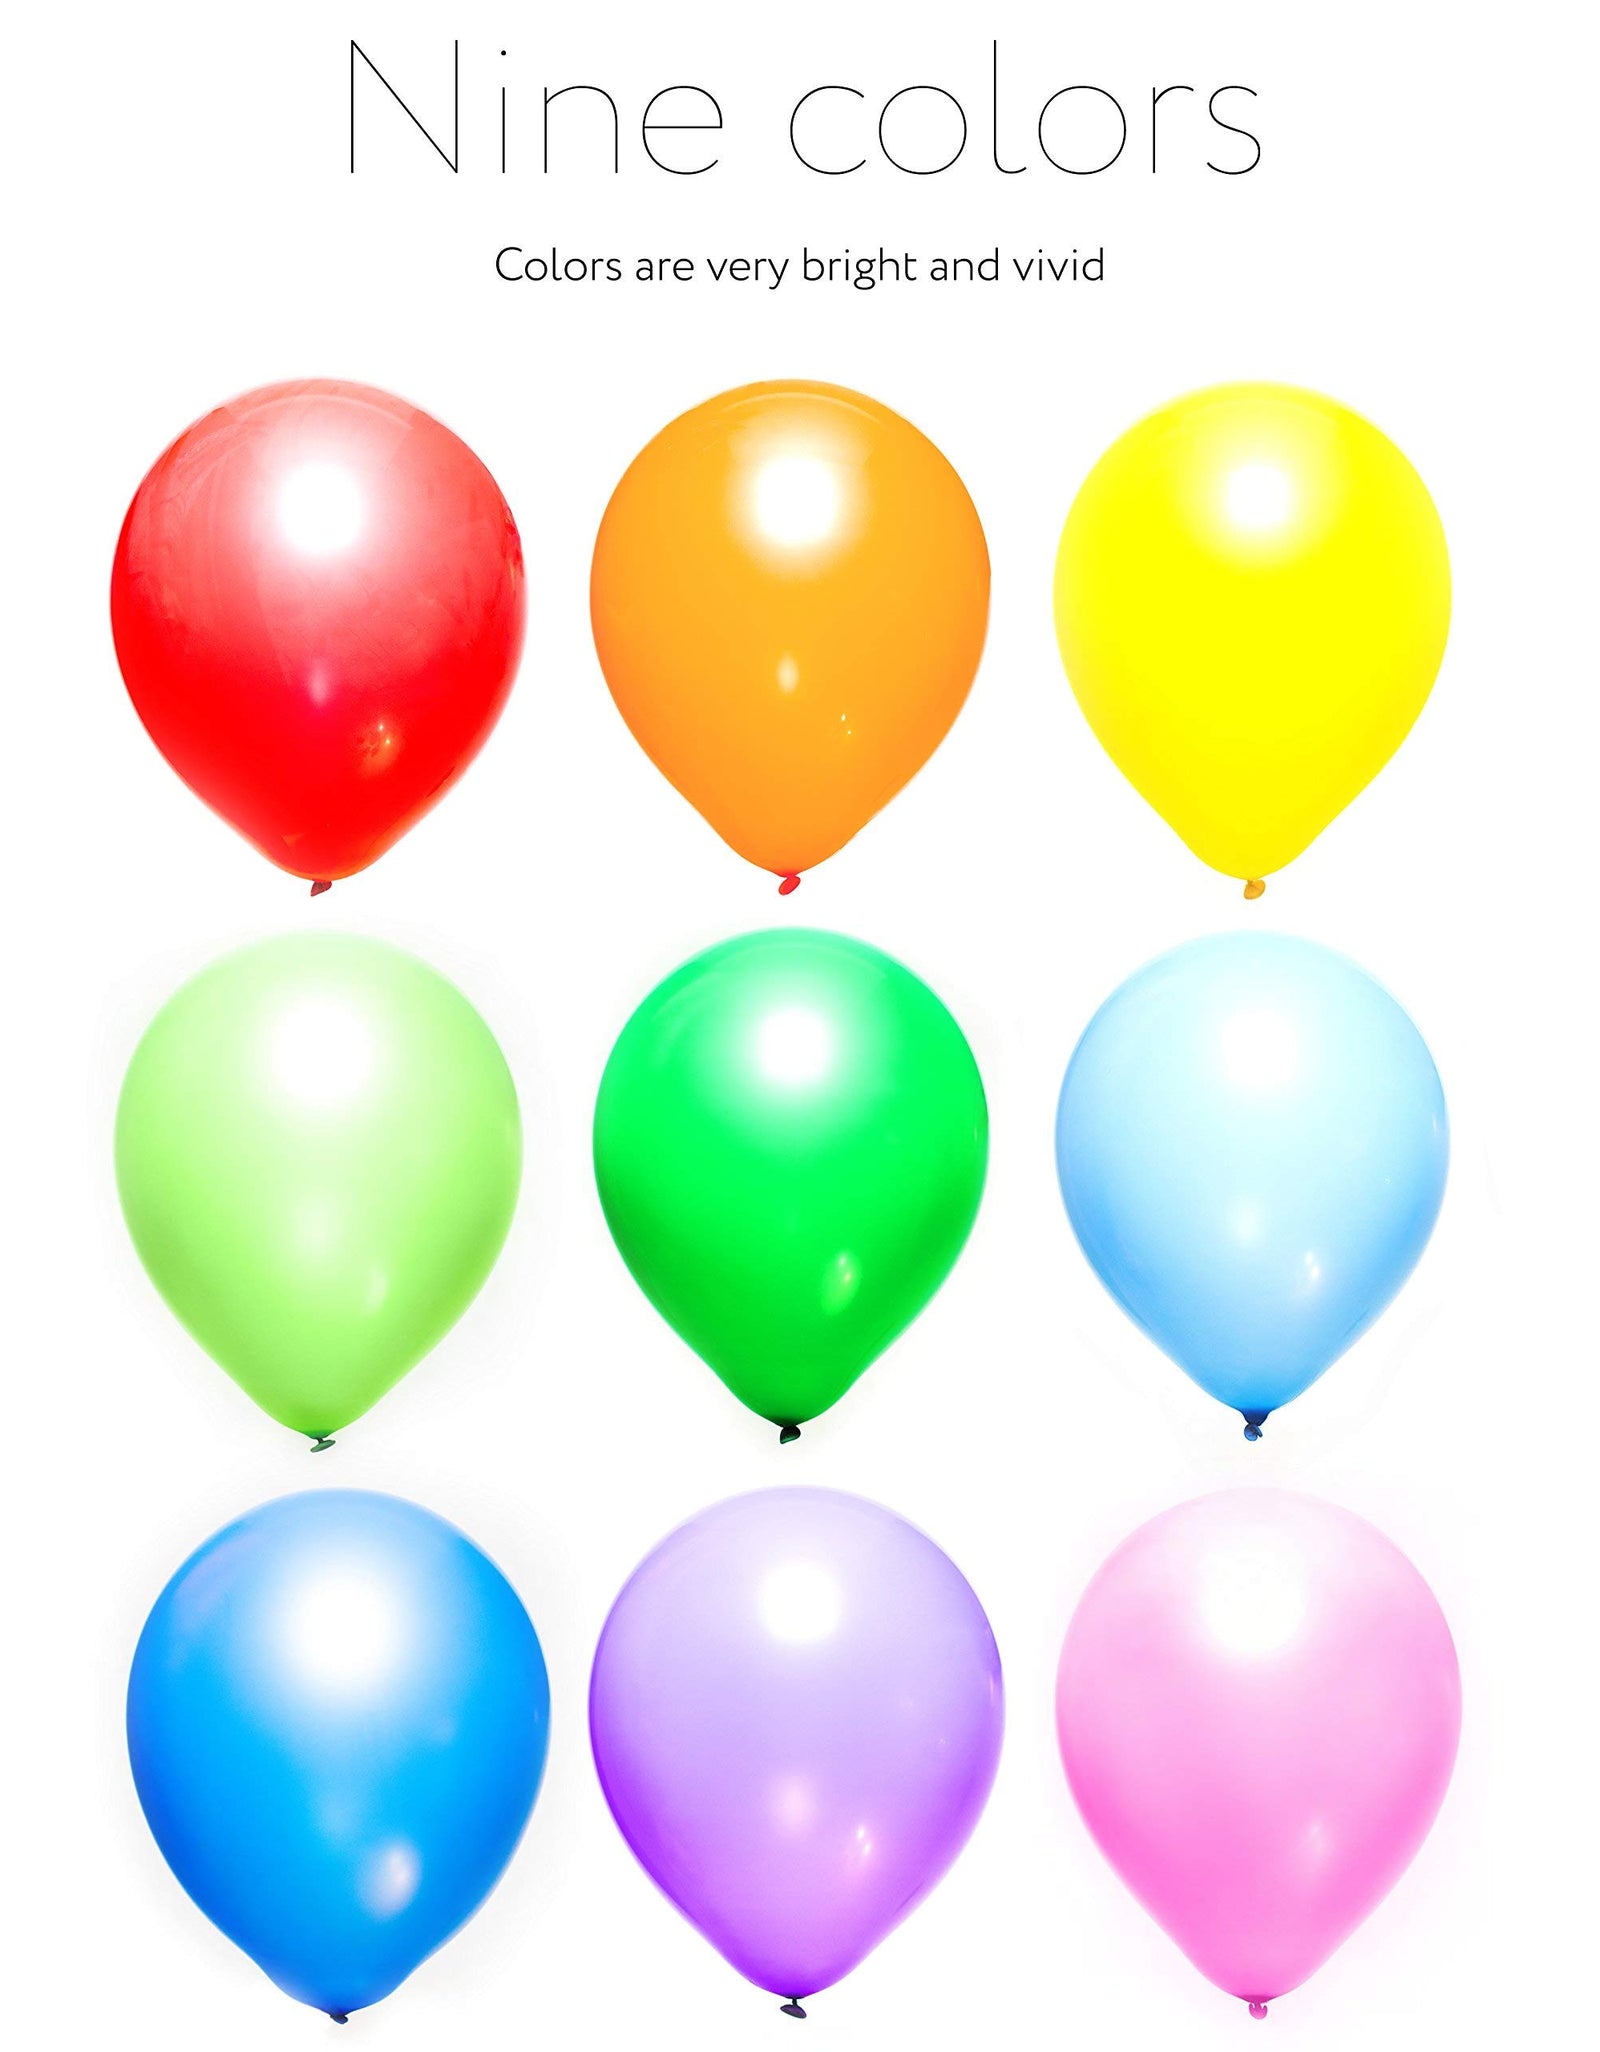 Dusico® Balloons Rainbow Set (100 Pack) 12 Inches, Assorted Bright Colors, Made With Strong Multicolored Latex, For Helium Or Air Use. Kids Birthday Party Decoration Accessory